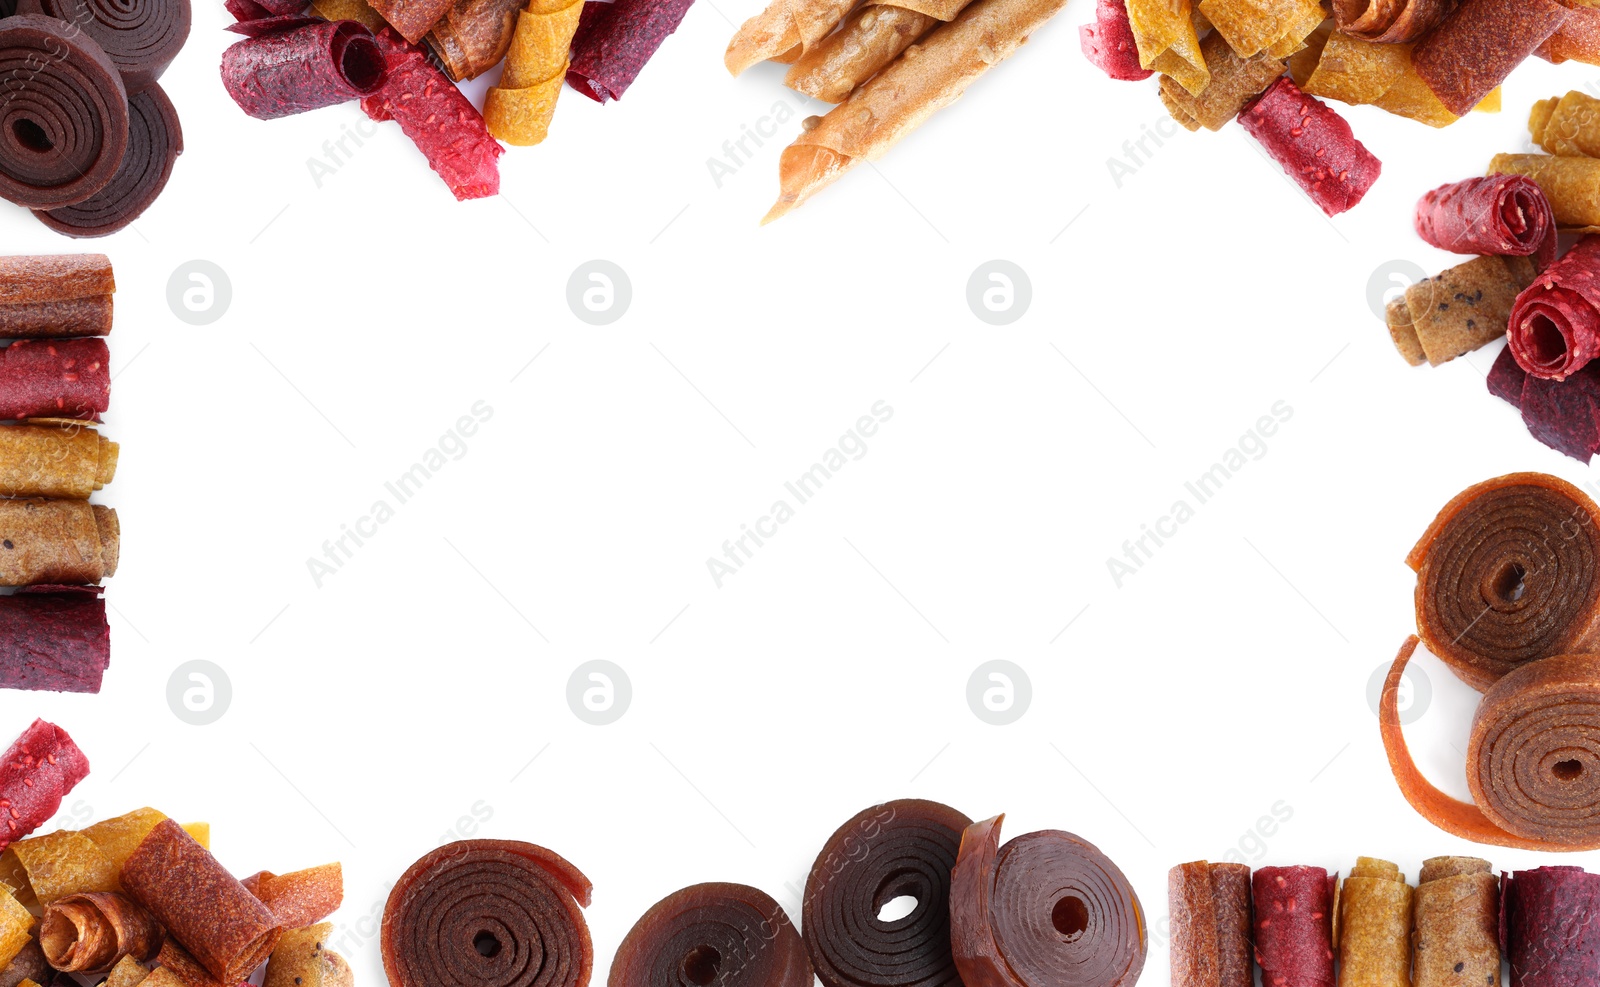 Image of Frame made of delicious fruit leather rolls on white background